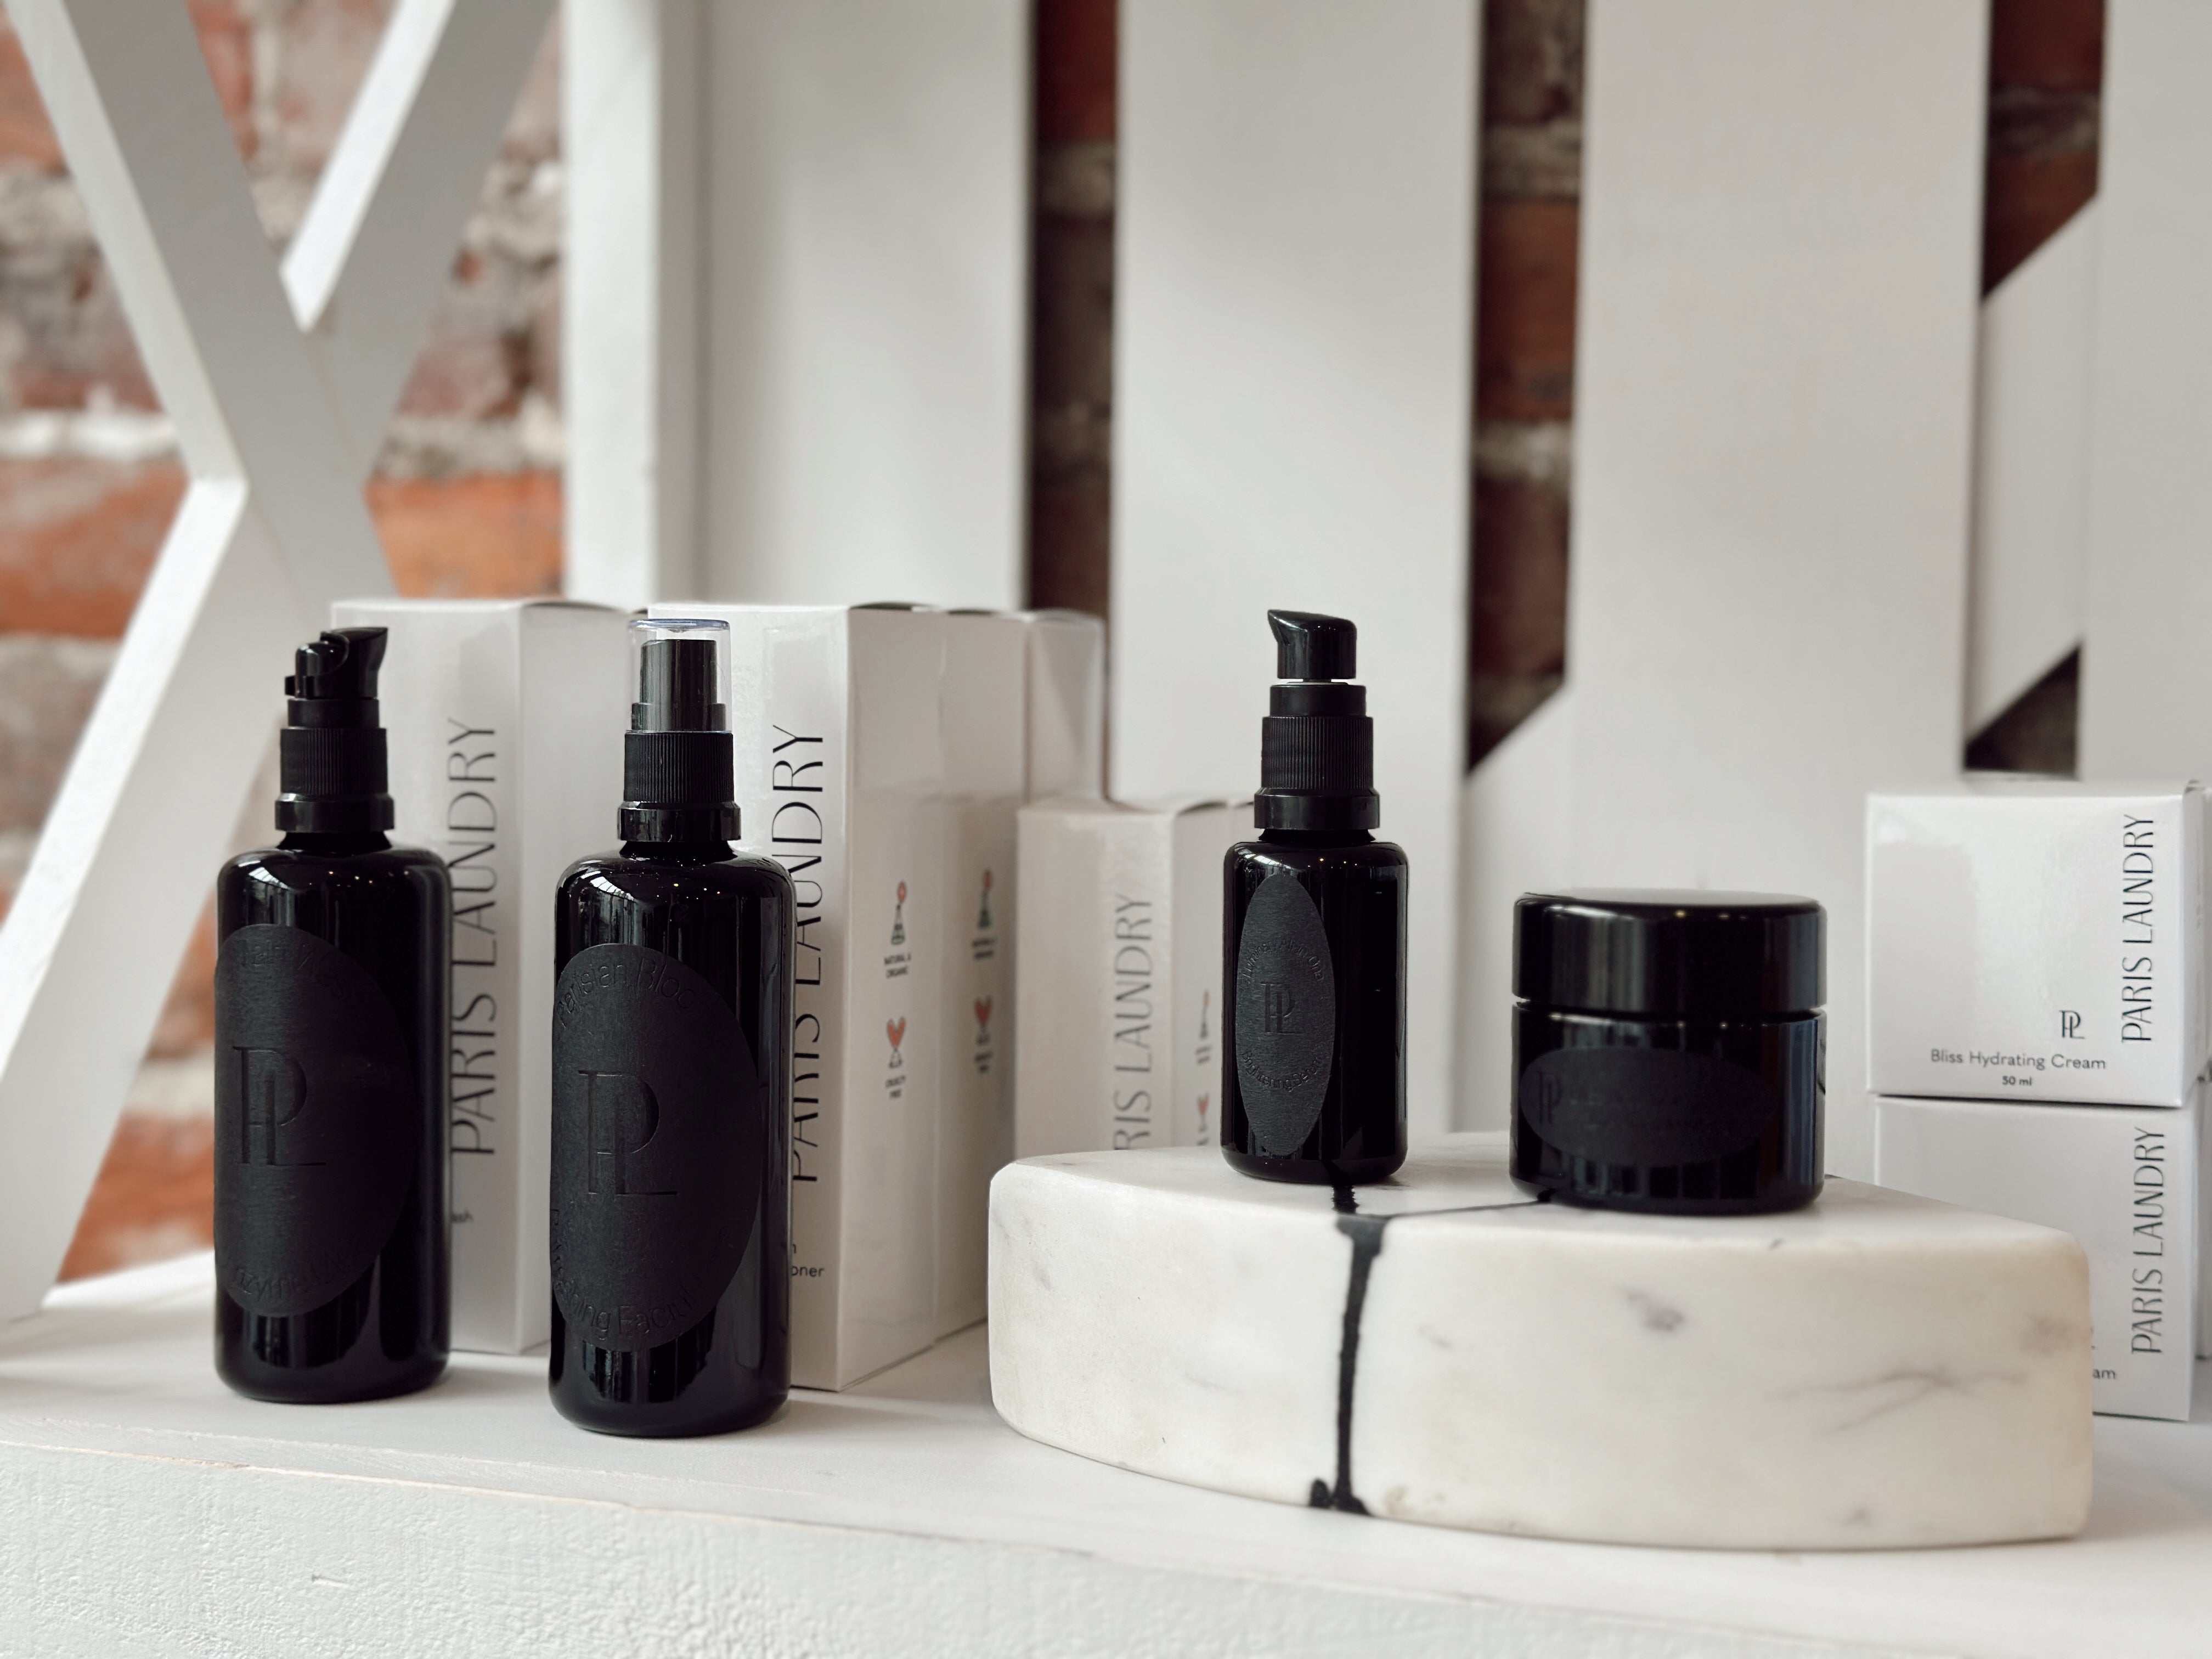 The Ultimate Clean Beauty Regimen: A Step-by-Step Guide to Our New Skincare Collection